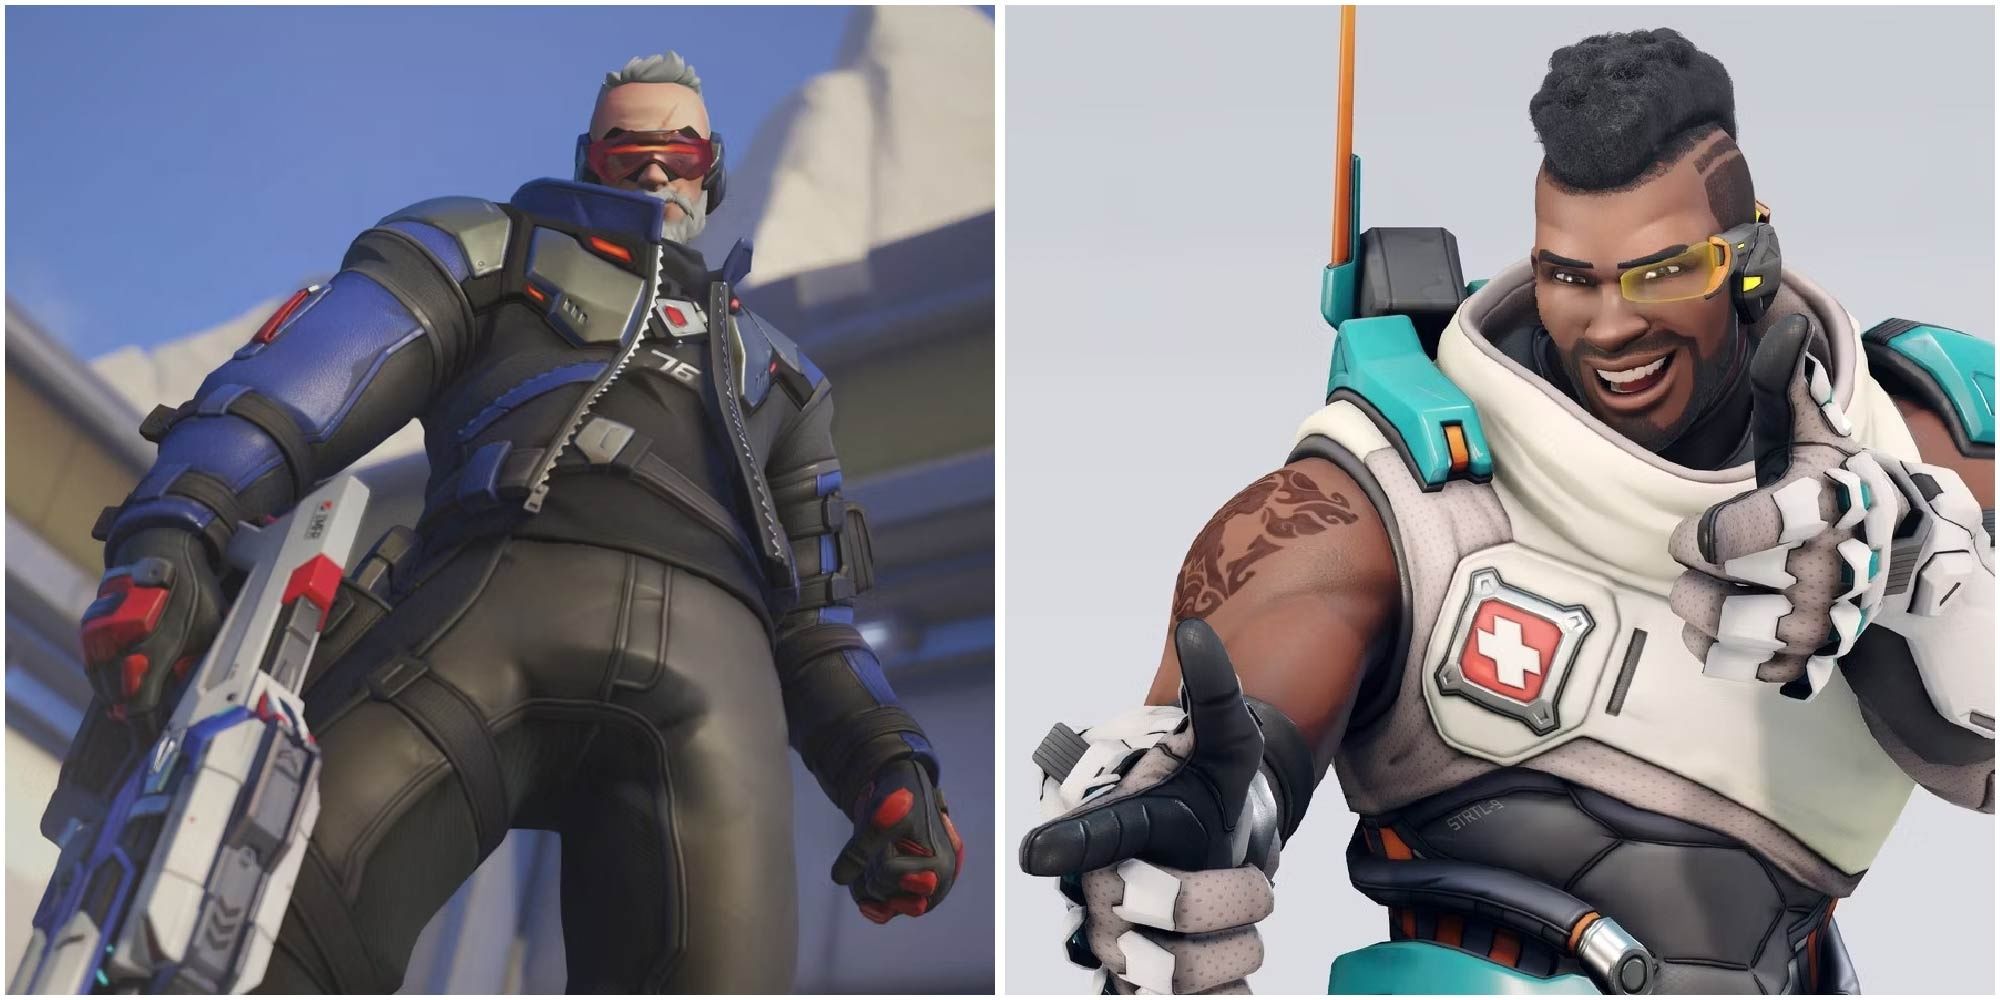 Soldier 76 And Baptiste, from Overwatch 2